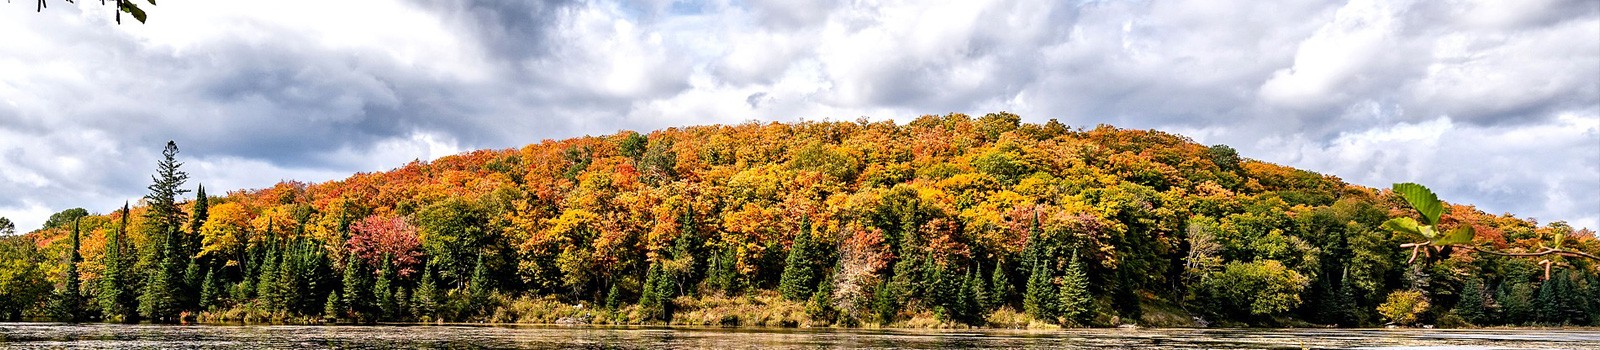 Fall trees on a hill by a lake in Ontario